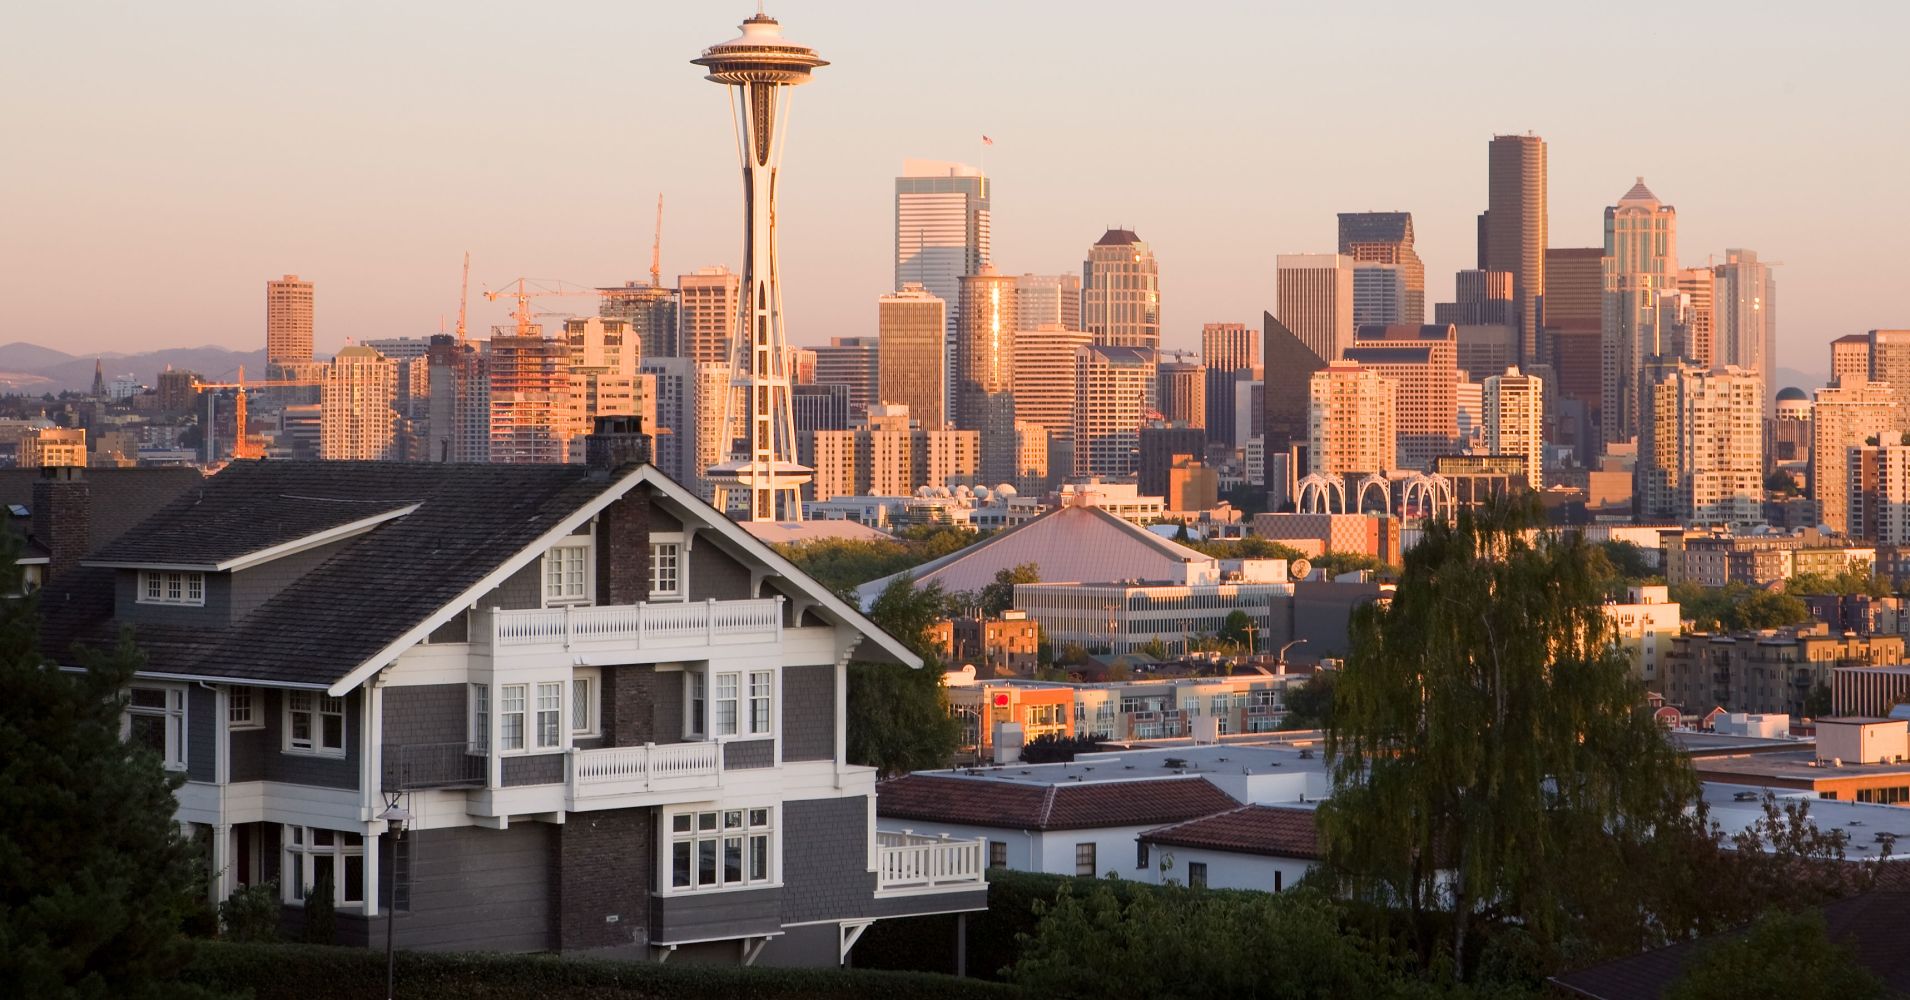 Seattle housing market is under pressure as Chinese buying 'dries up'